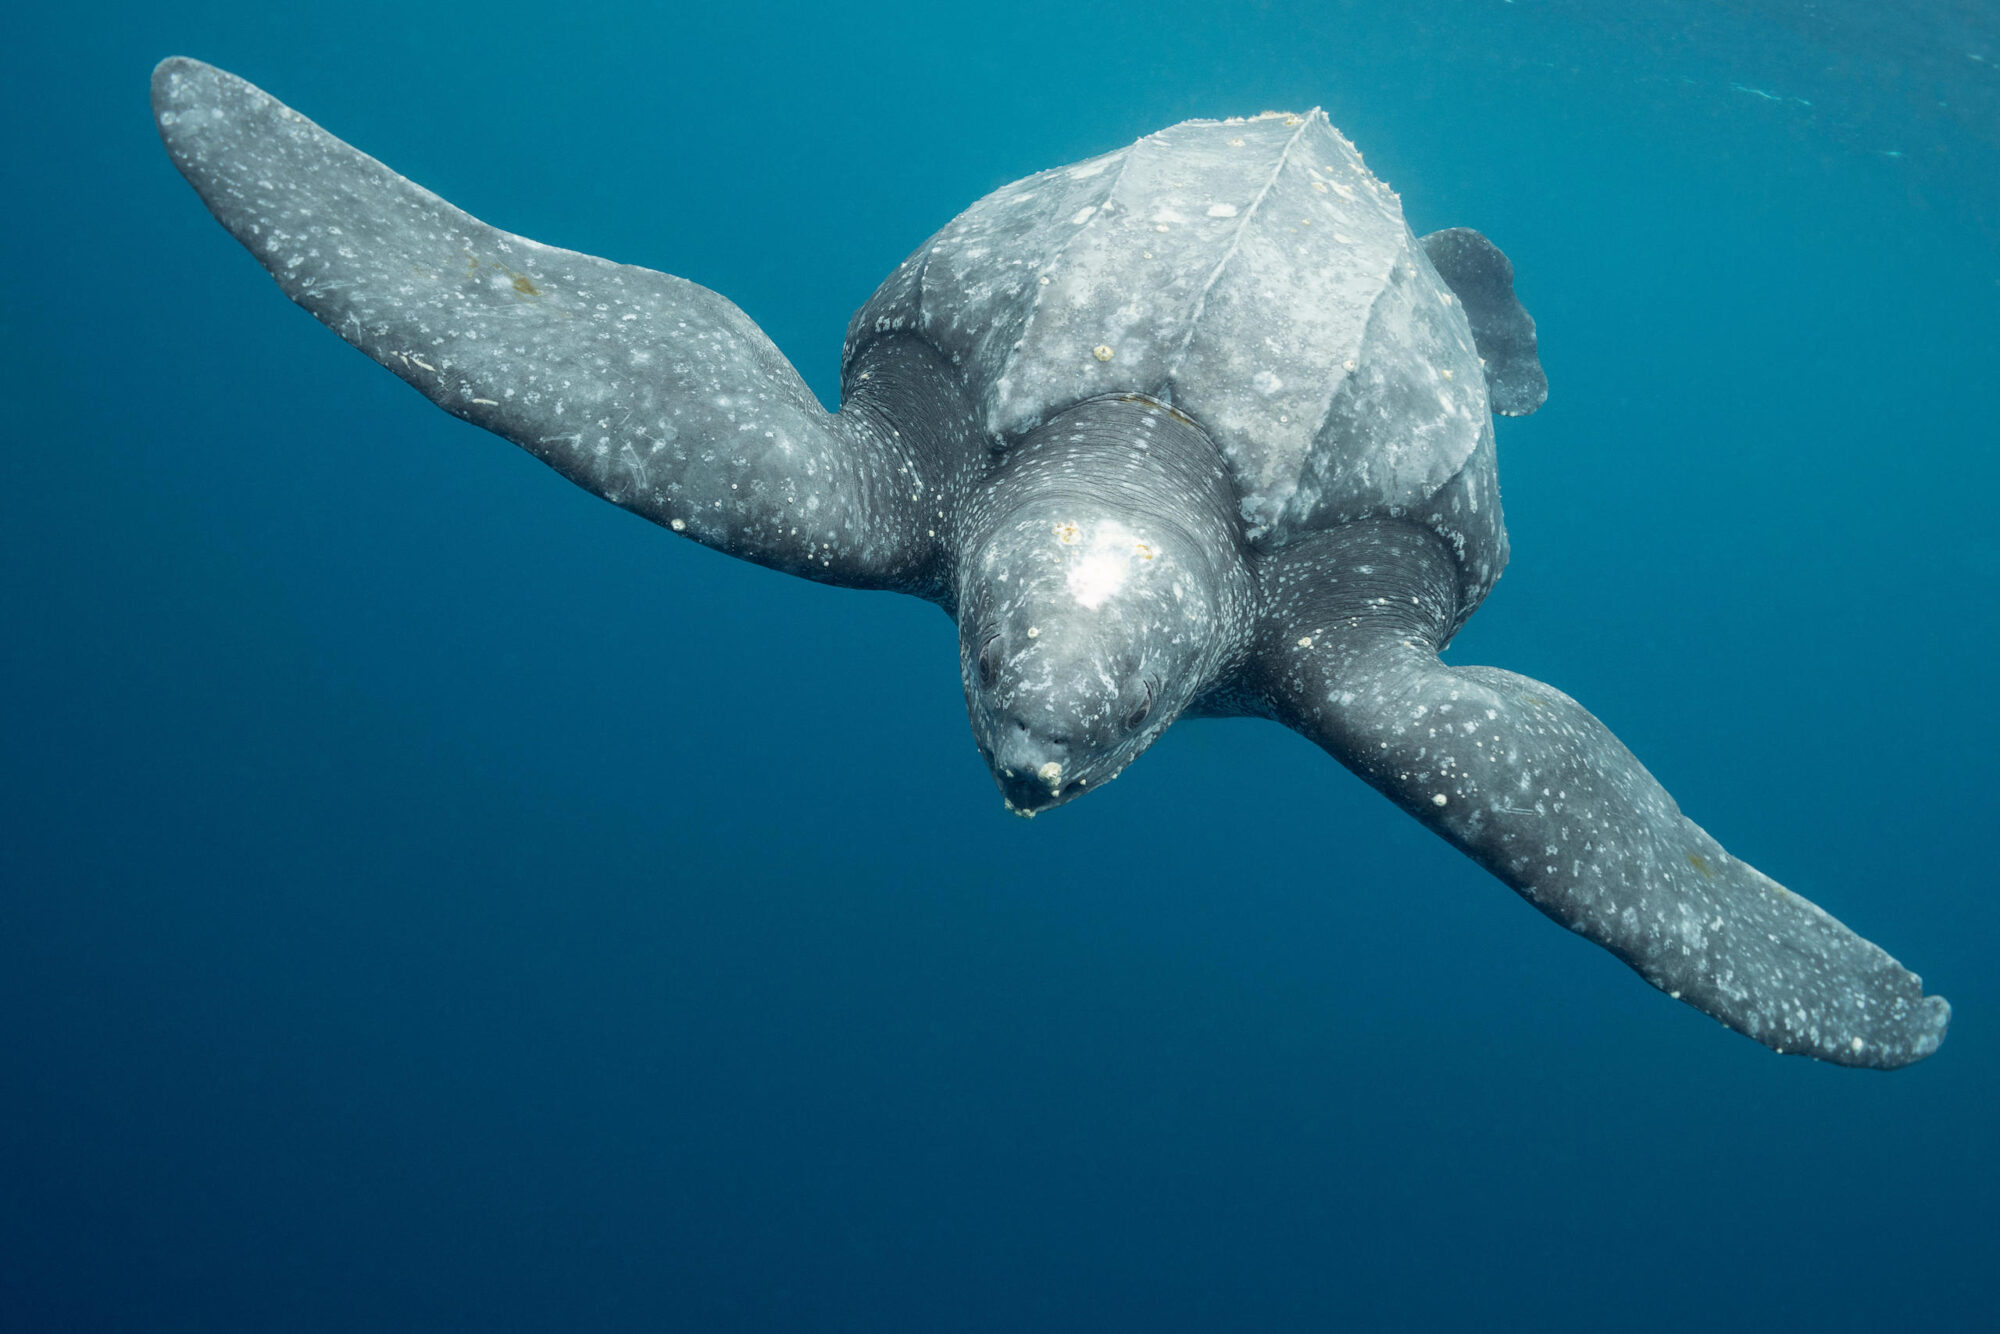 Pacific leatherback sea turtle is often spotted in the Nasca Ridge underwater mountain range